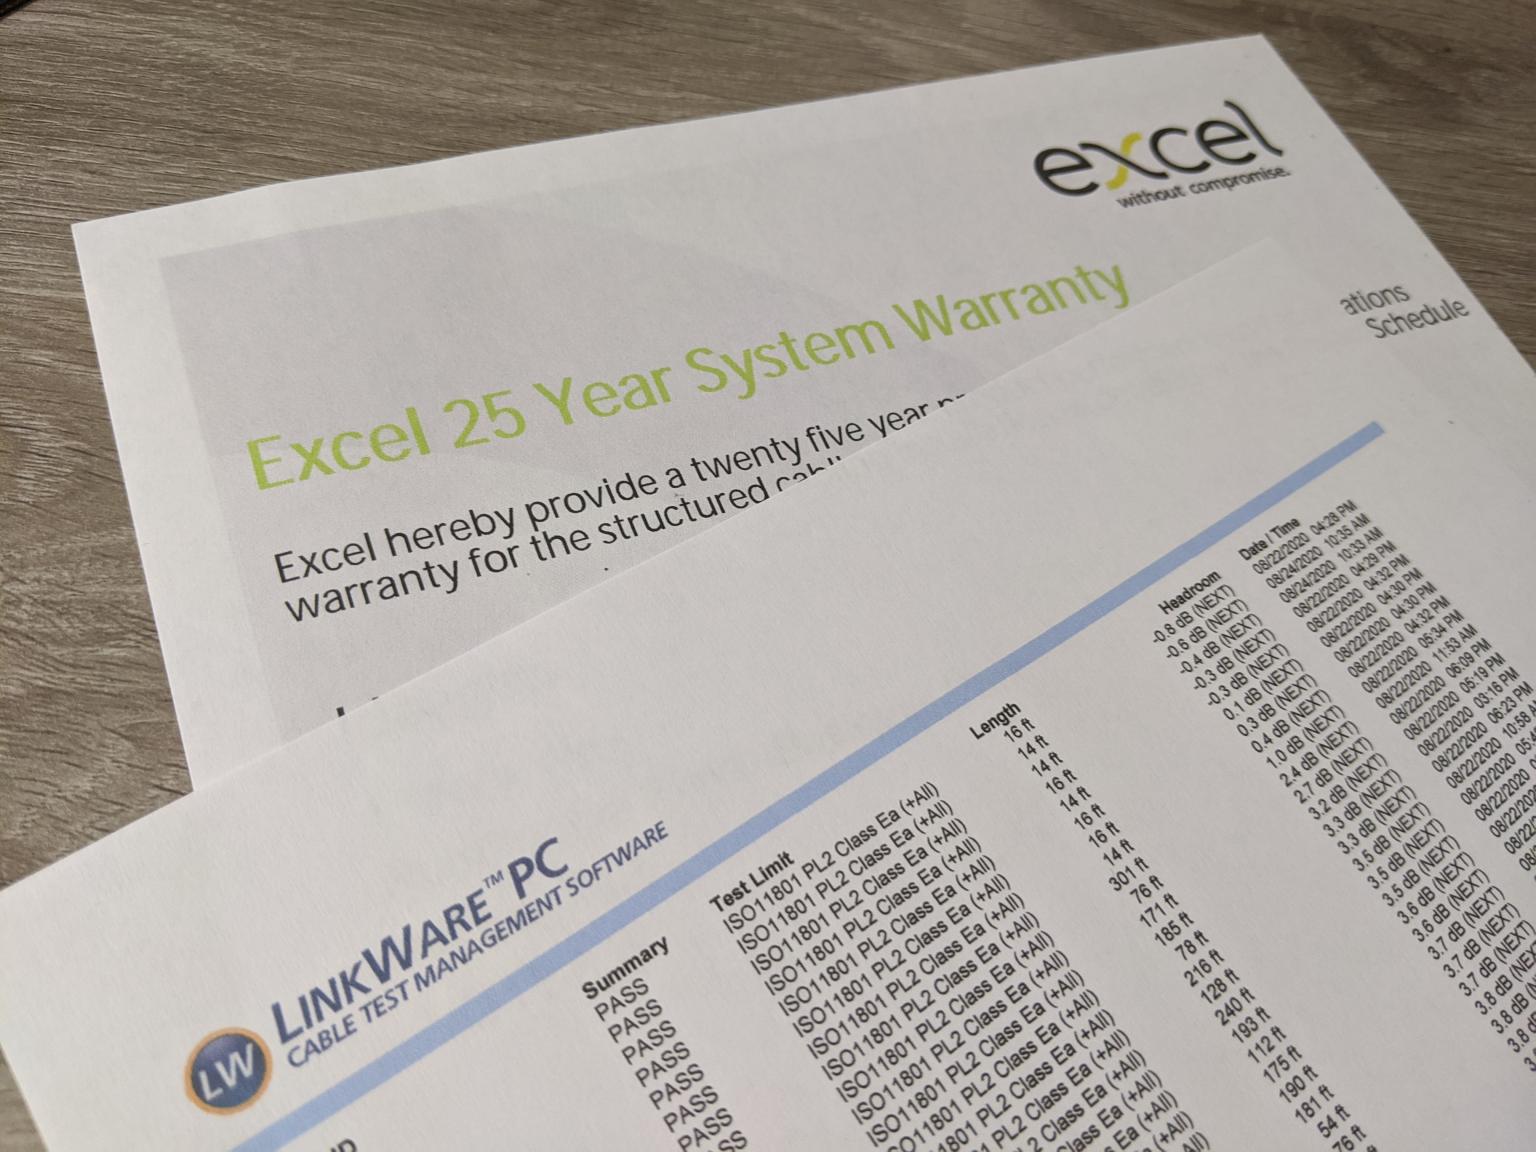 Does your data cabling installer offer a 25-year warranty?